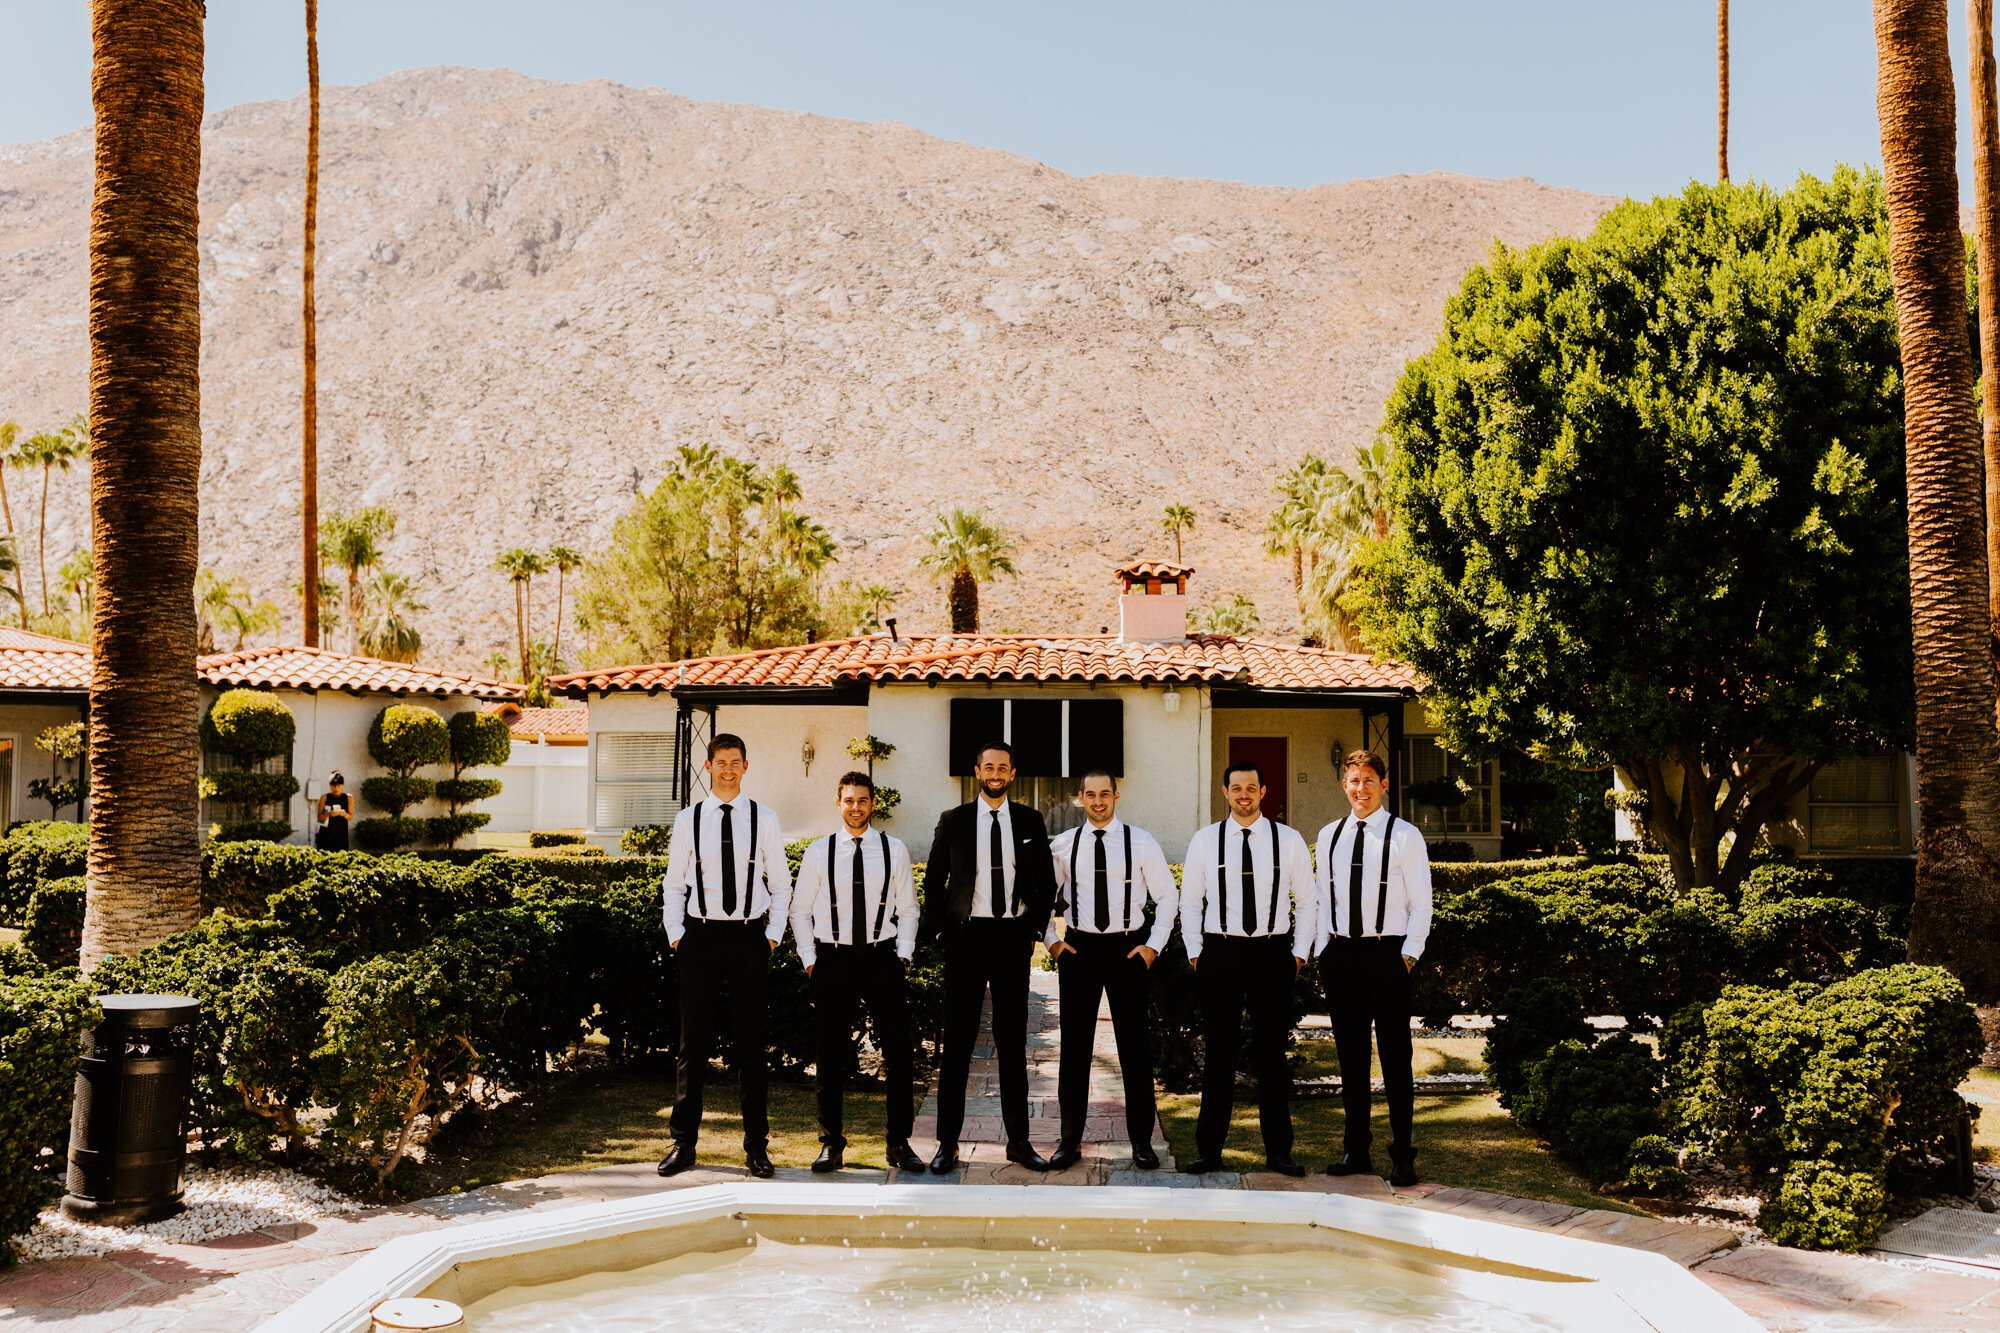 Palm Springs Wedding at the Avalon Hotel and Bugalows | Desert Fiesta Themed Wedding |Palm Springs Wedding Photographer | Tida Svy Photography | www.tidasvy.com